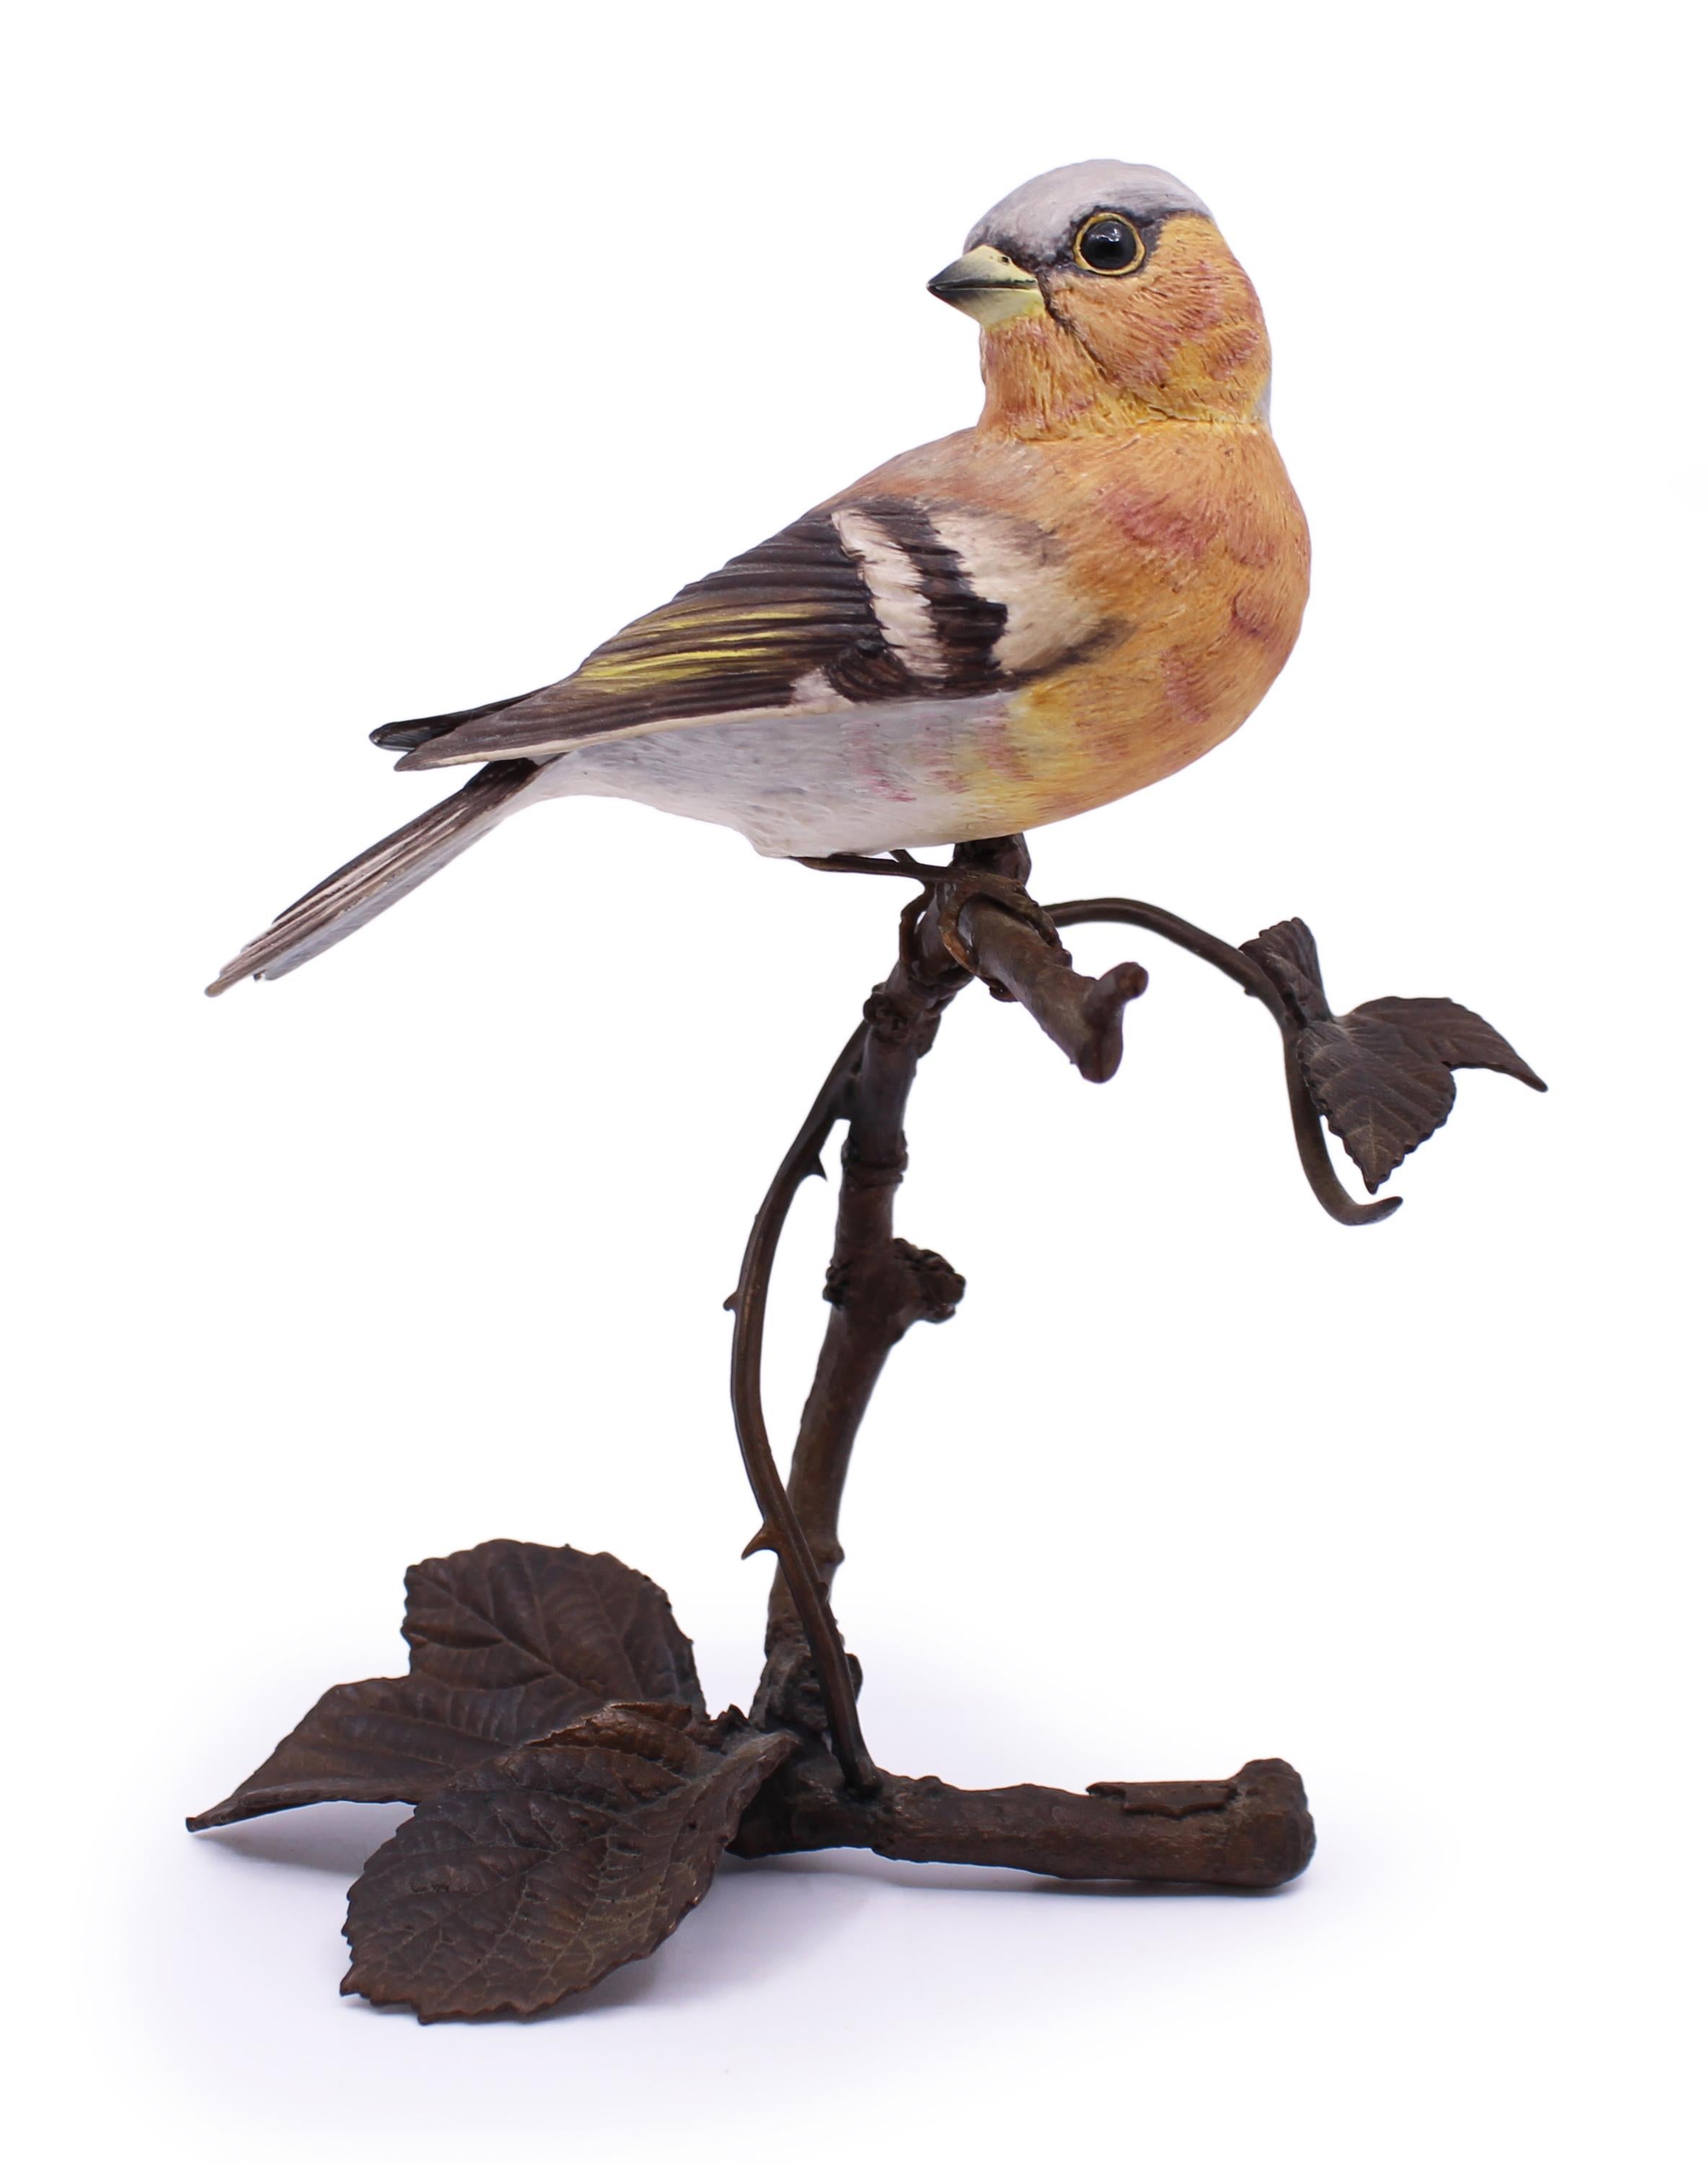 Albany Worcester county birds porcelain & bronze chaffinch


Albany Fine China Ltd England, Worcester

Chaffinch from the County Birds series

Measures: Height 16 cm / 6 1/4 in

Condition Very good condition; free from chips, cracks or